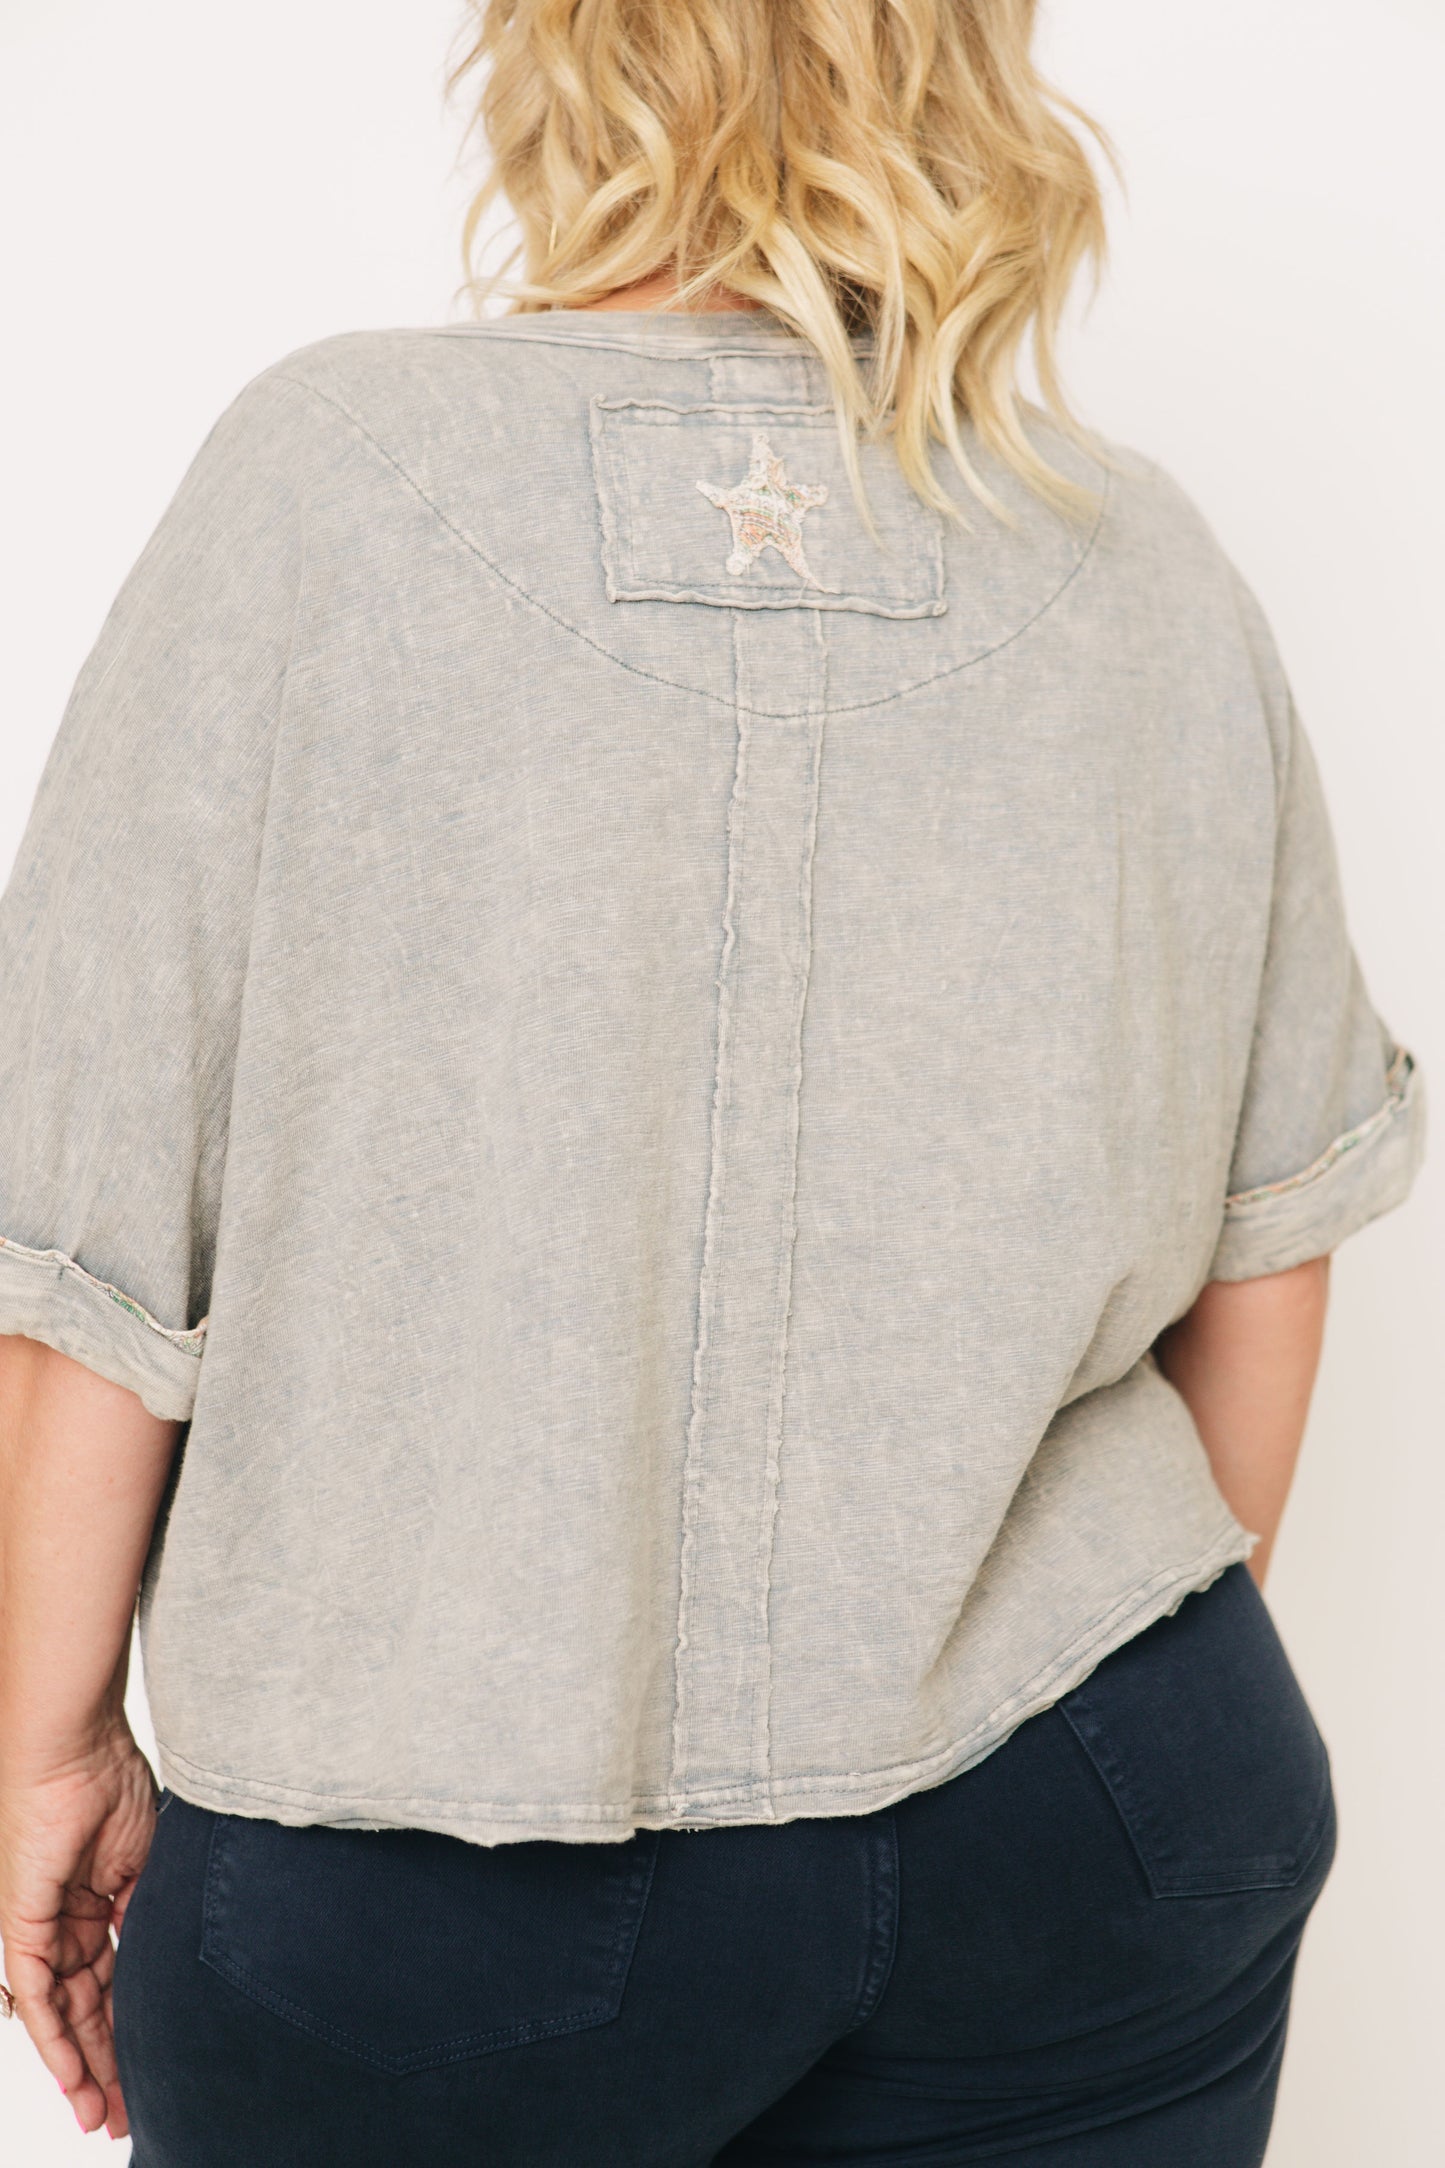 Starlight Patched Short Sleeve Top (S-XL)